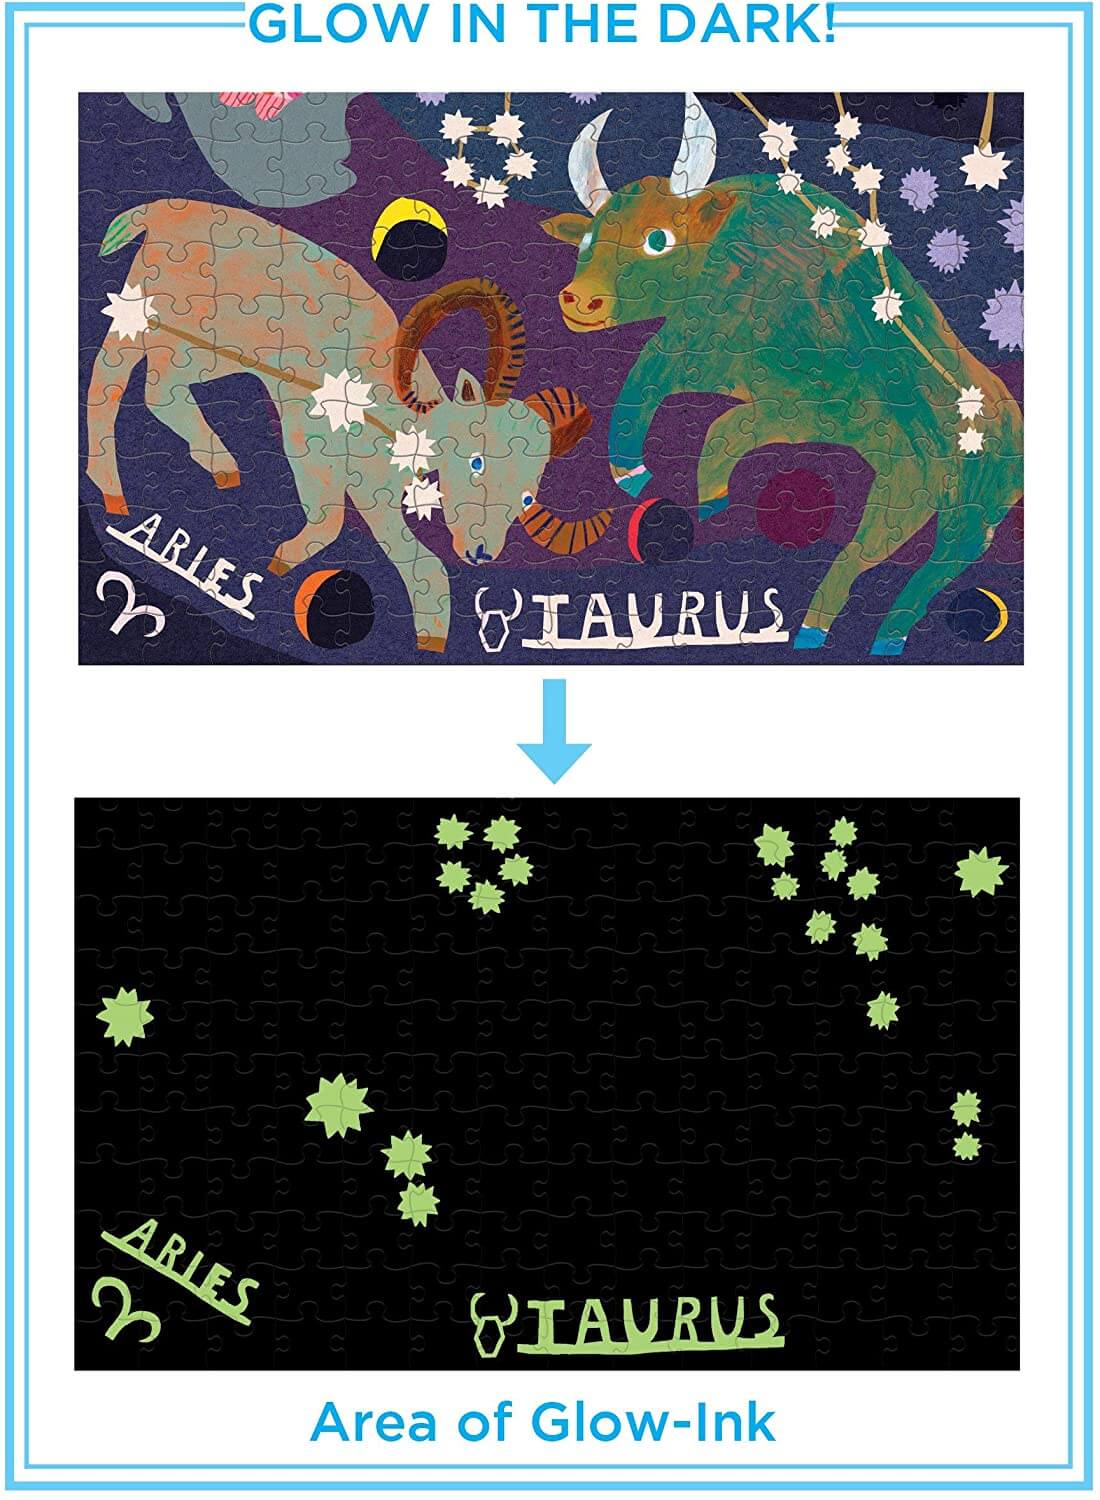 eeBoo - Piece and Love Zodiac Constellation 1000 Piece Square Adult Jigsaw Puzzle Glow in The Dark areas of the puzzle that glow in the dark